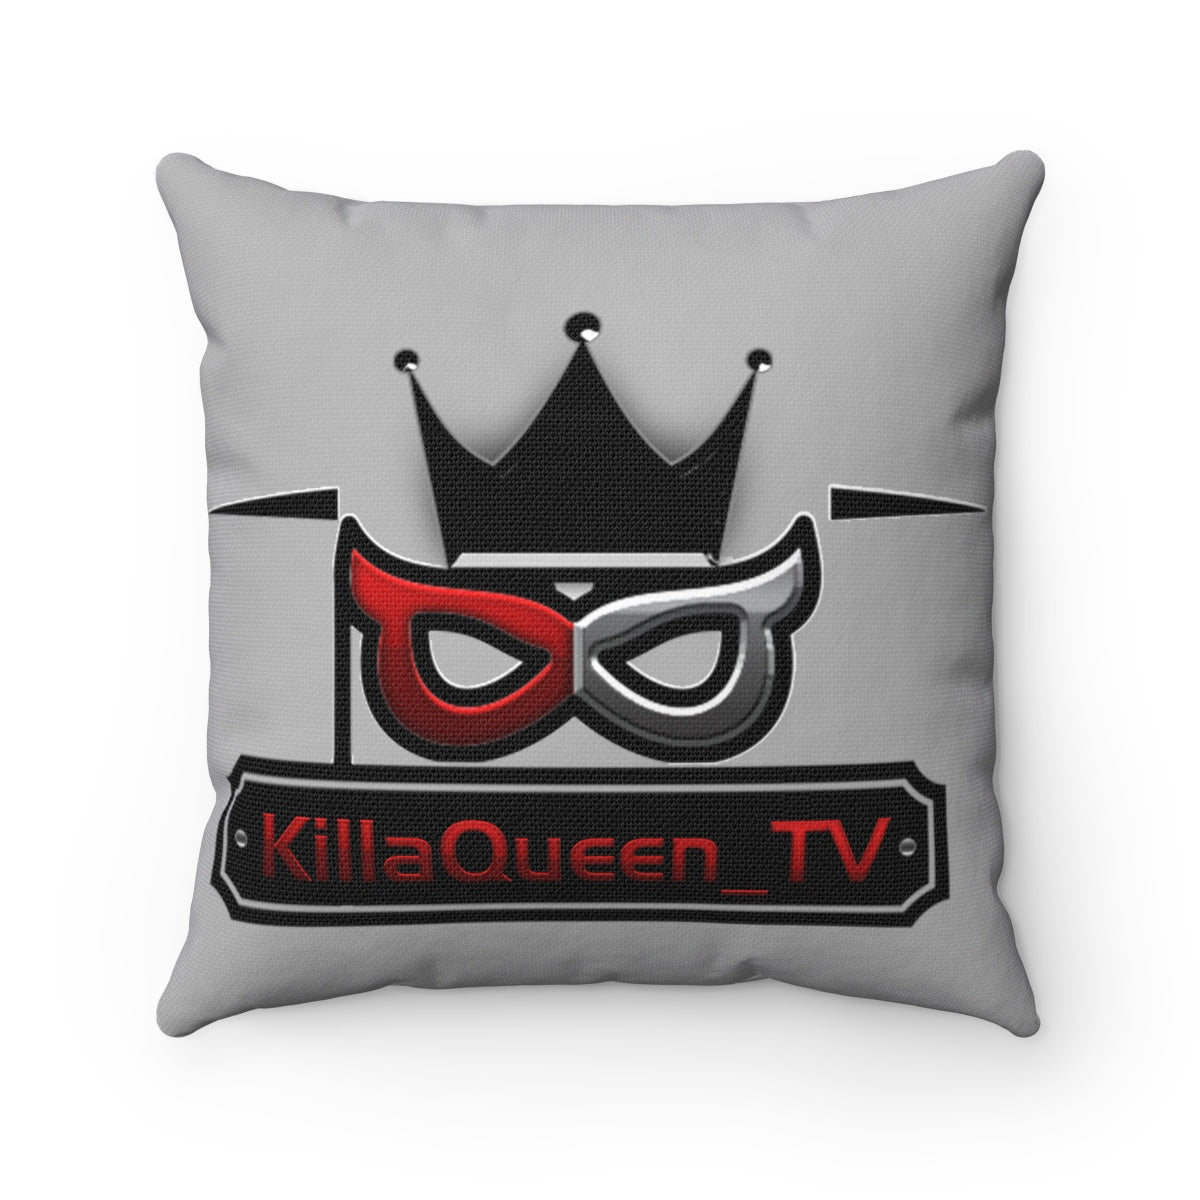 s-kq SQUARE PILLOW